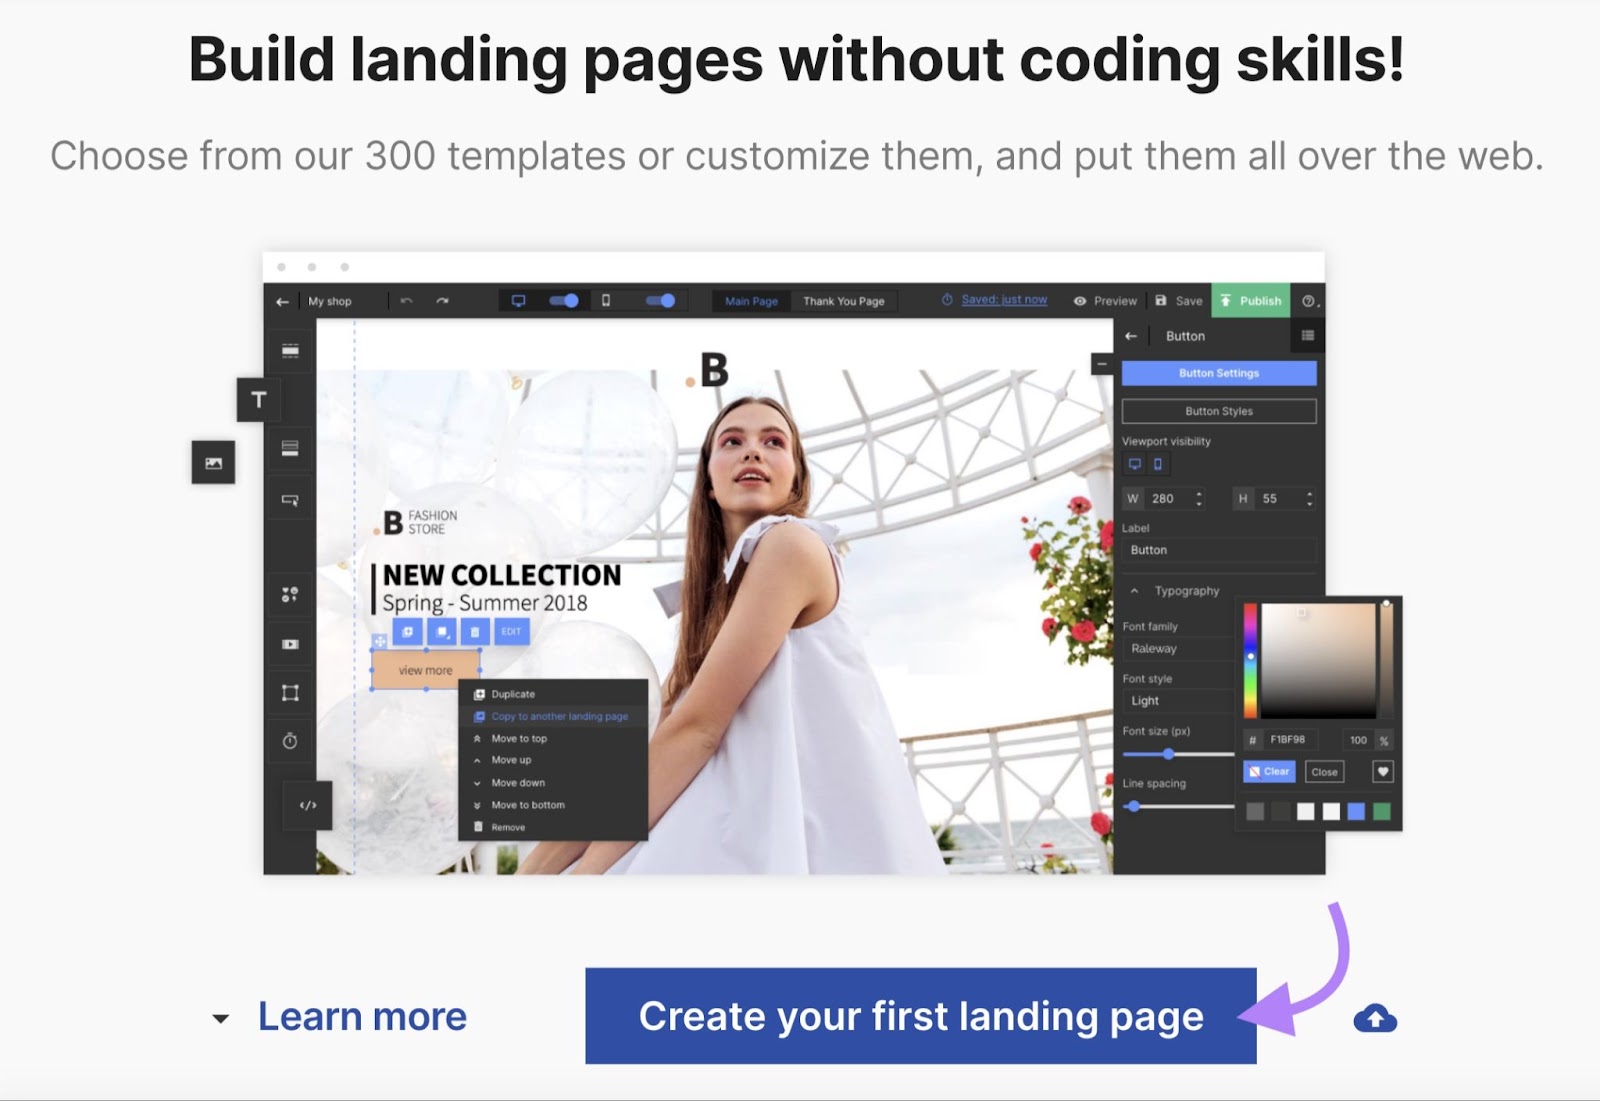 “Create your first landing page" button highlighted